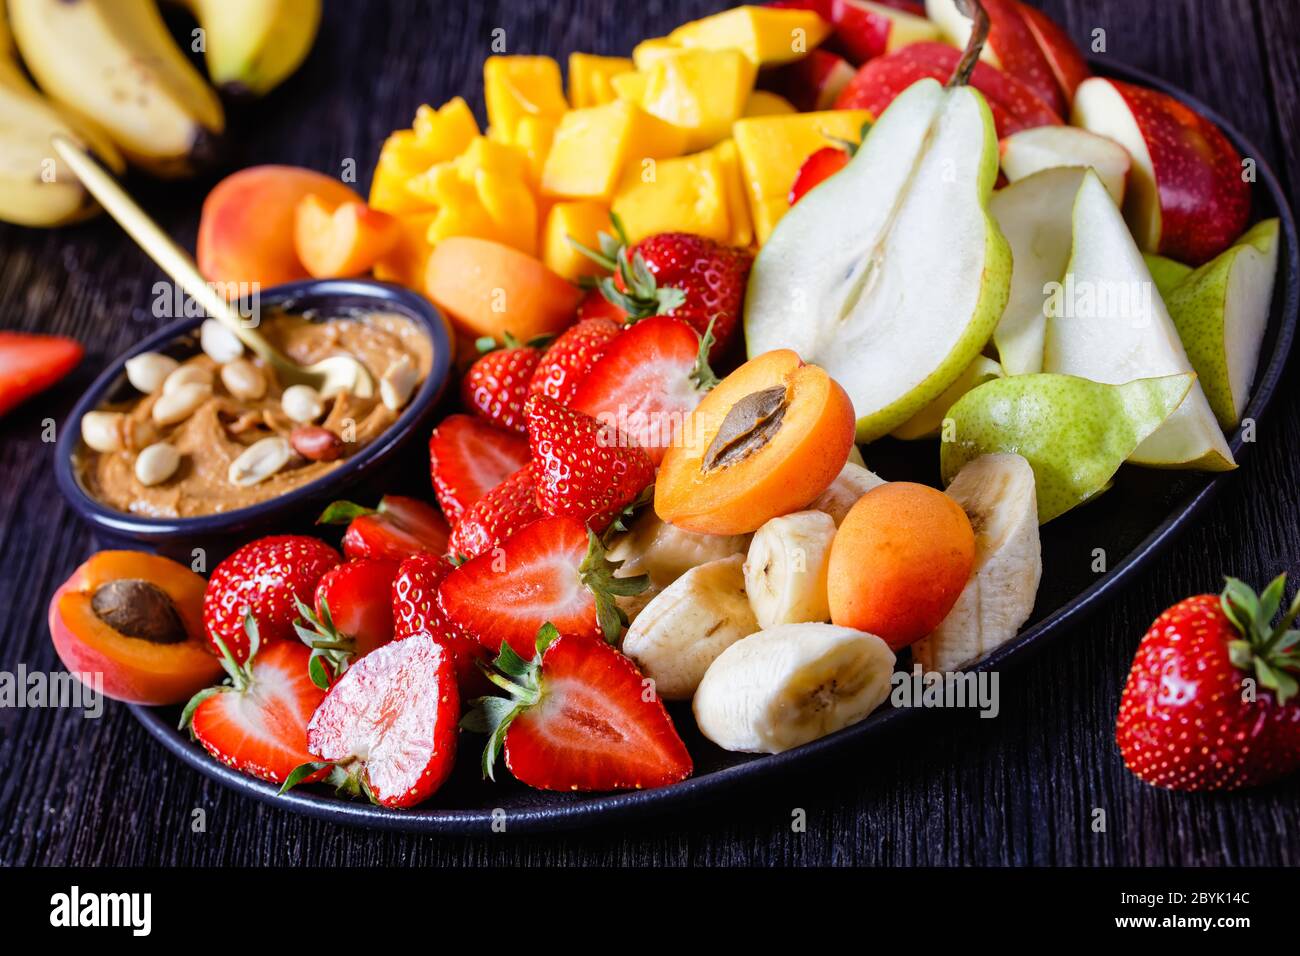 Rainbow fruit platter of fresh fruits and berries with peanut dip: strawberries, tropical mango, banana, apples, pears, apricots and peanuts on a blac Stock Photo